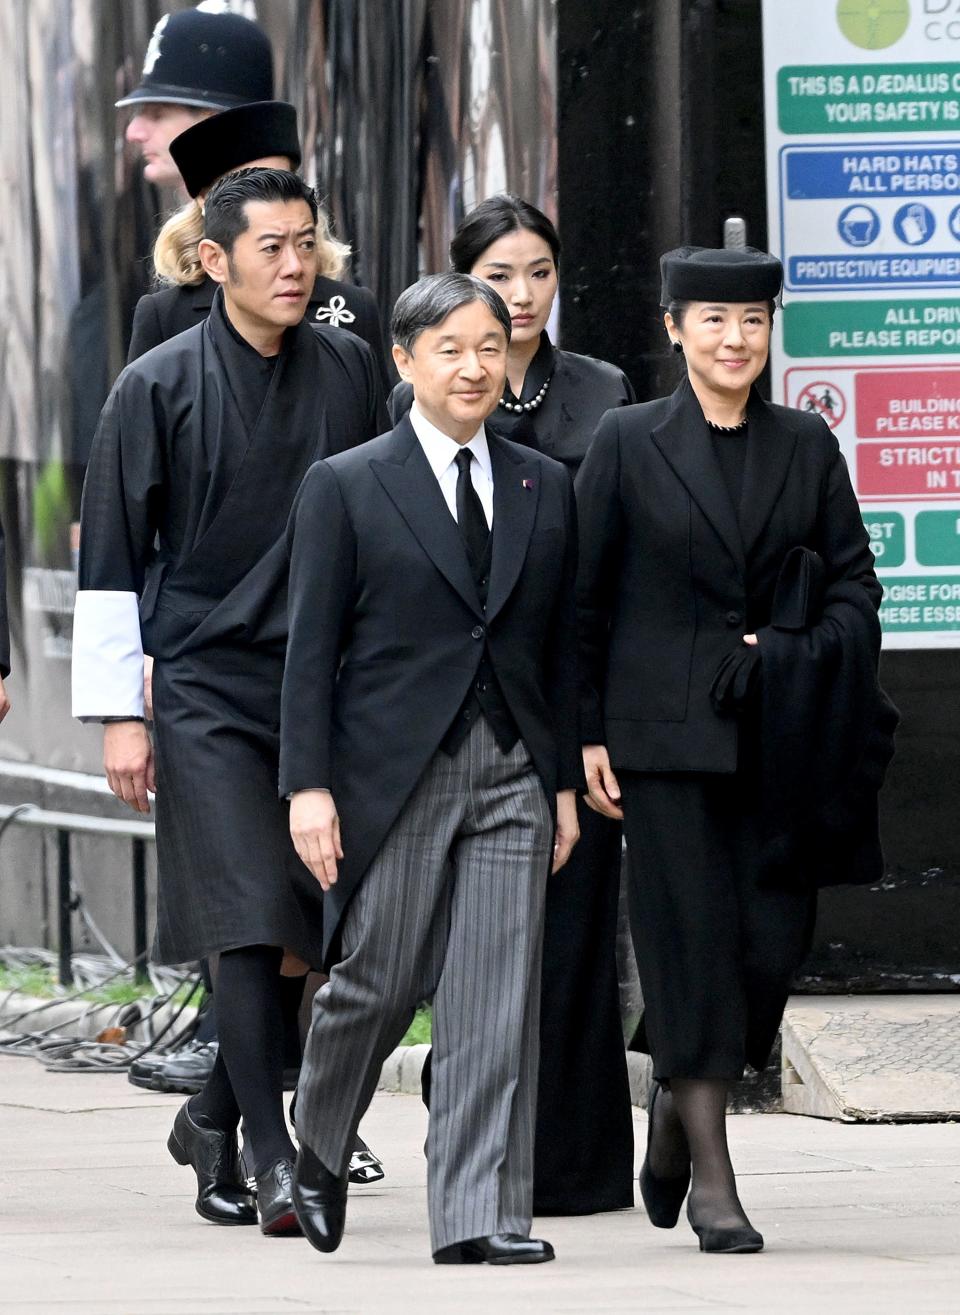 Emperor Naruhito and Empress Masako arrive for the State Funeral of Queen Elizabeth II at Westminster Abbey on September 19, 2022 in London, England.